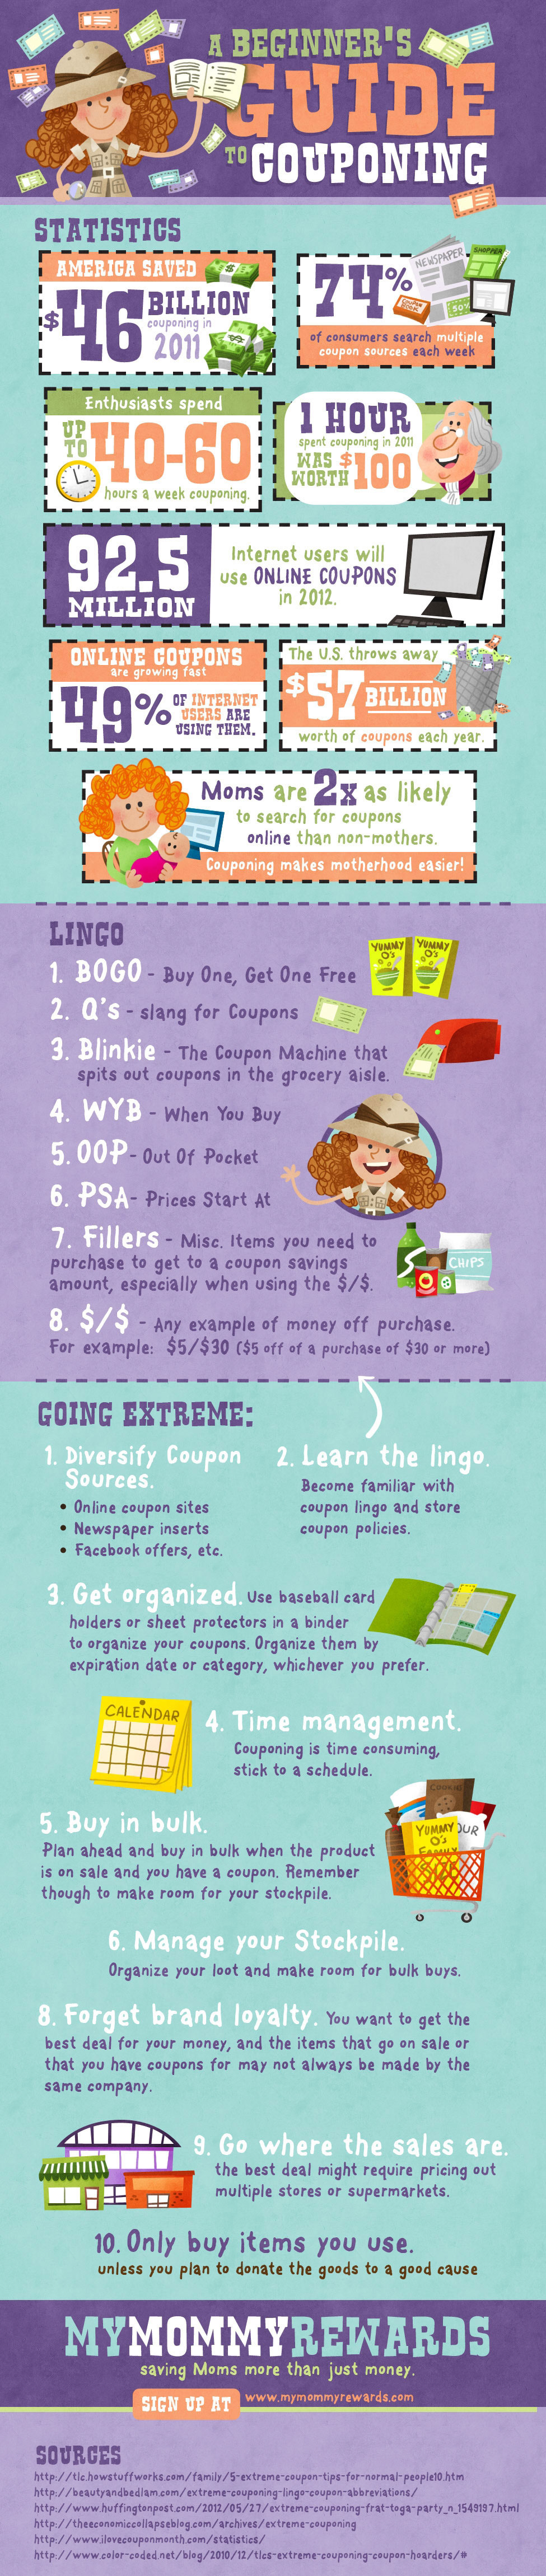 Coupon Hunter Guide-Infographic